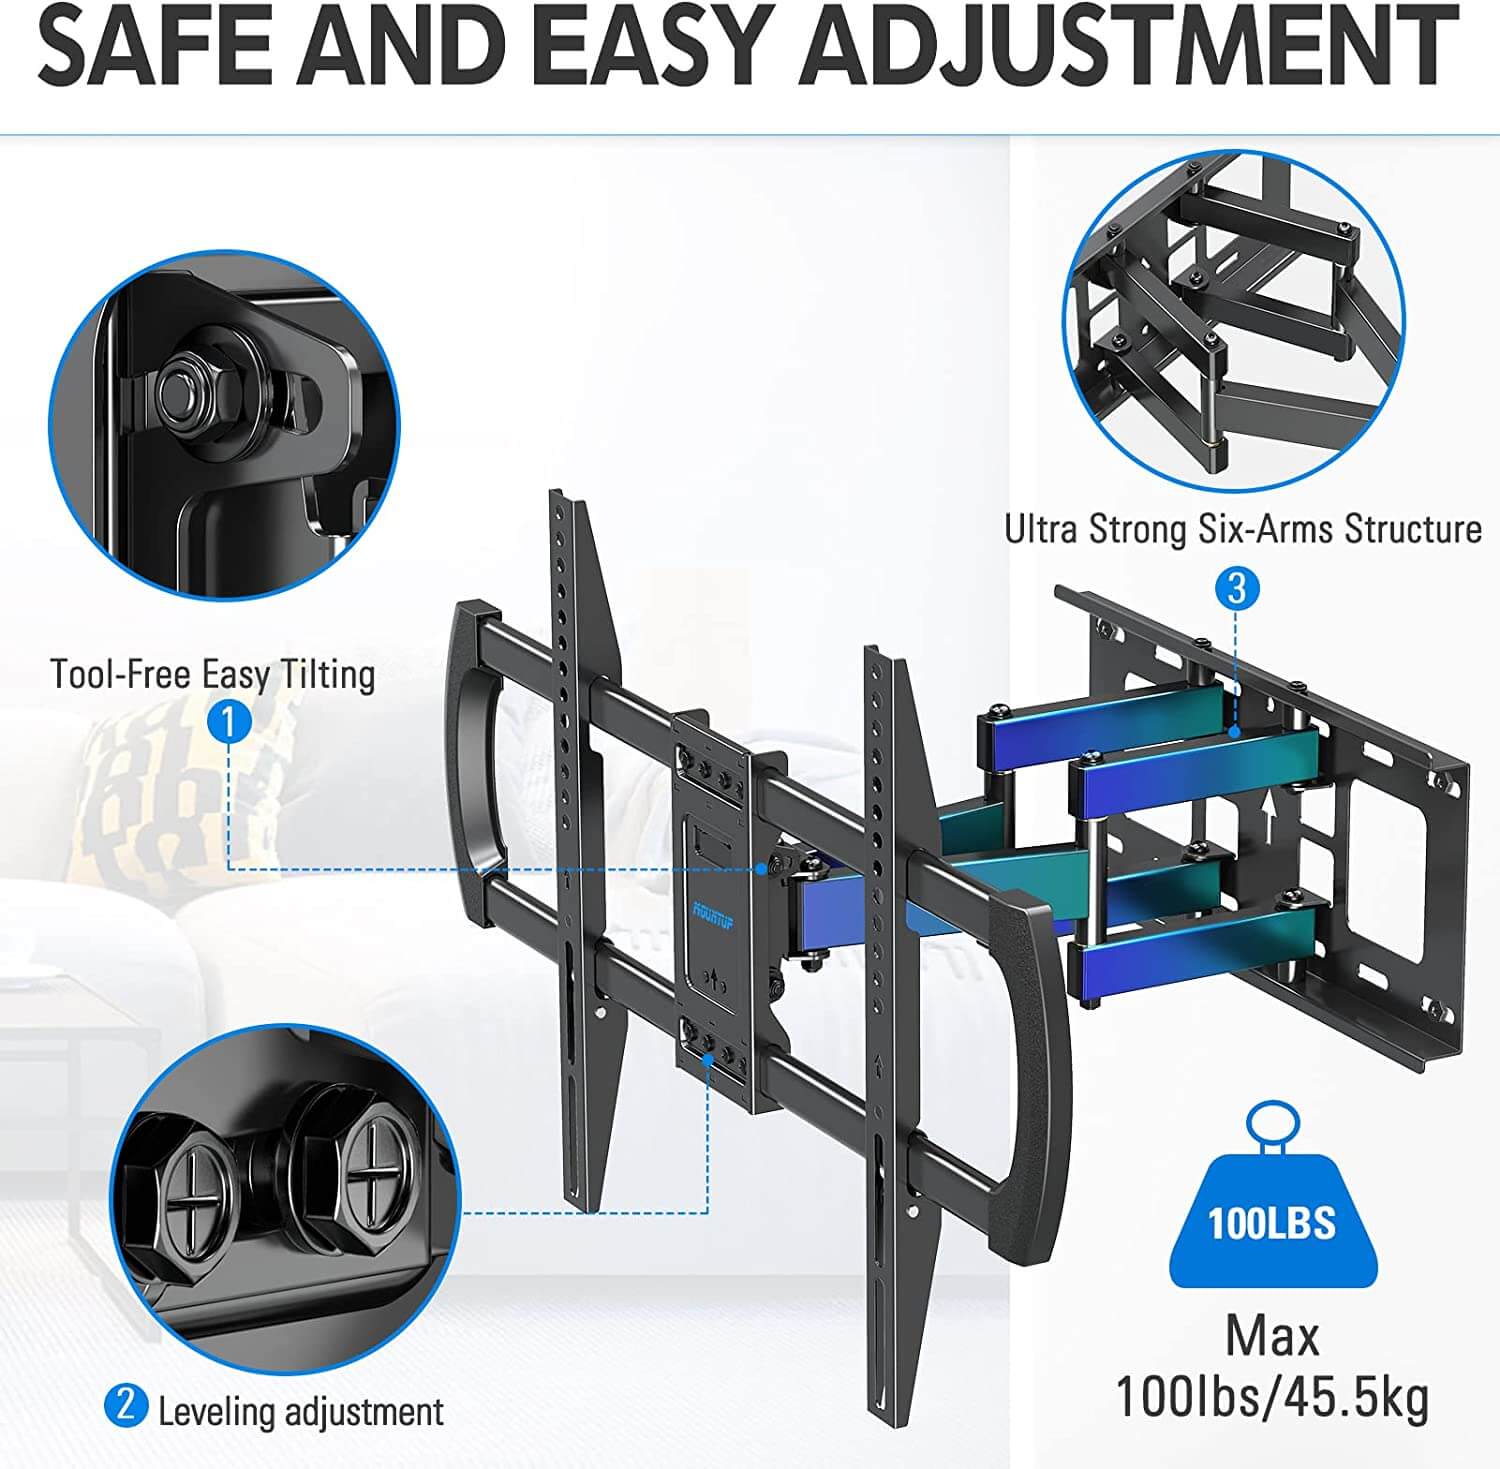 TV mount built with tool-free tilting and strong articulating arms